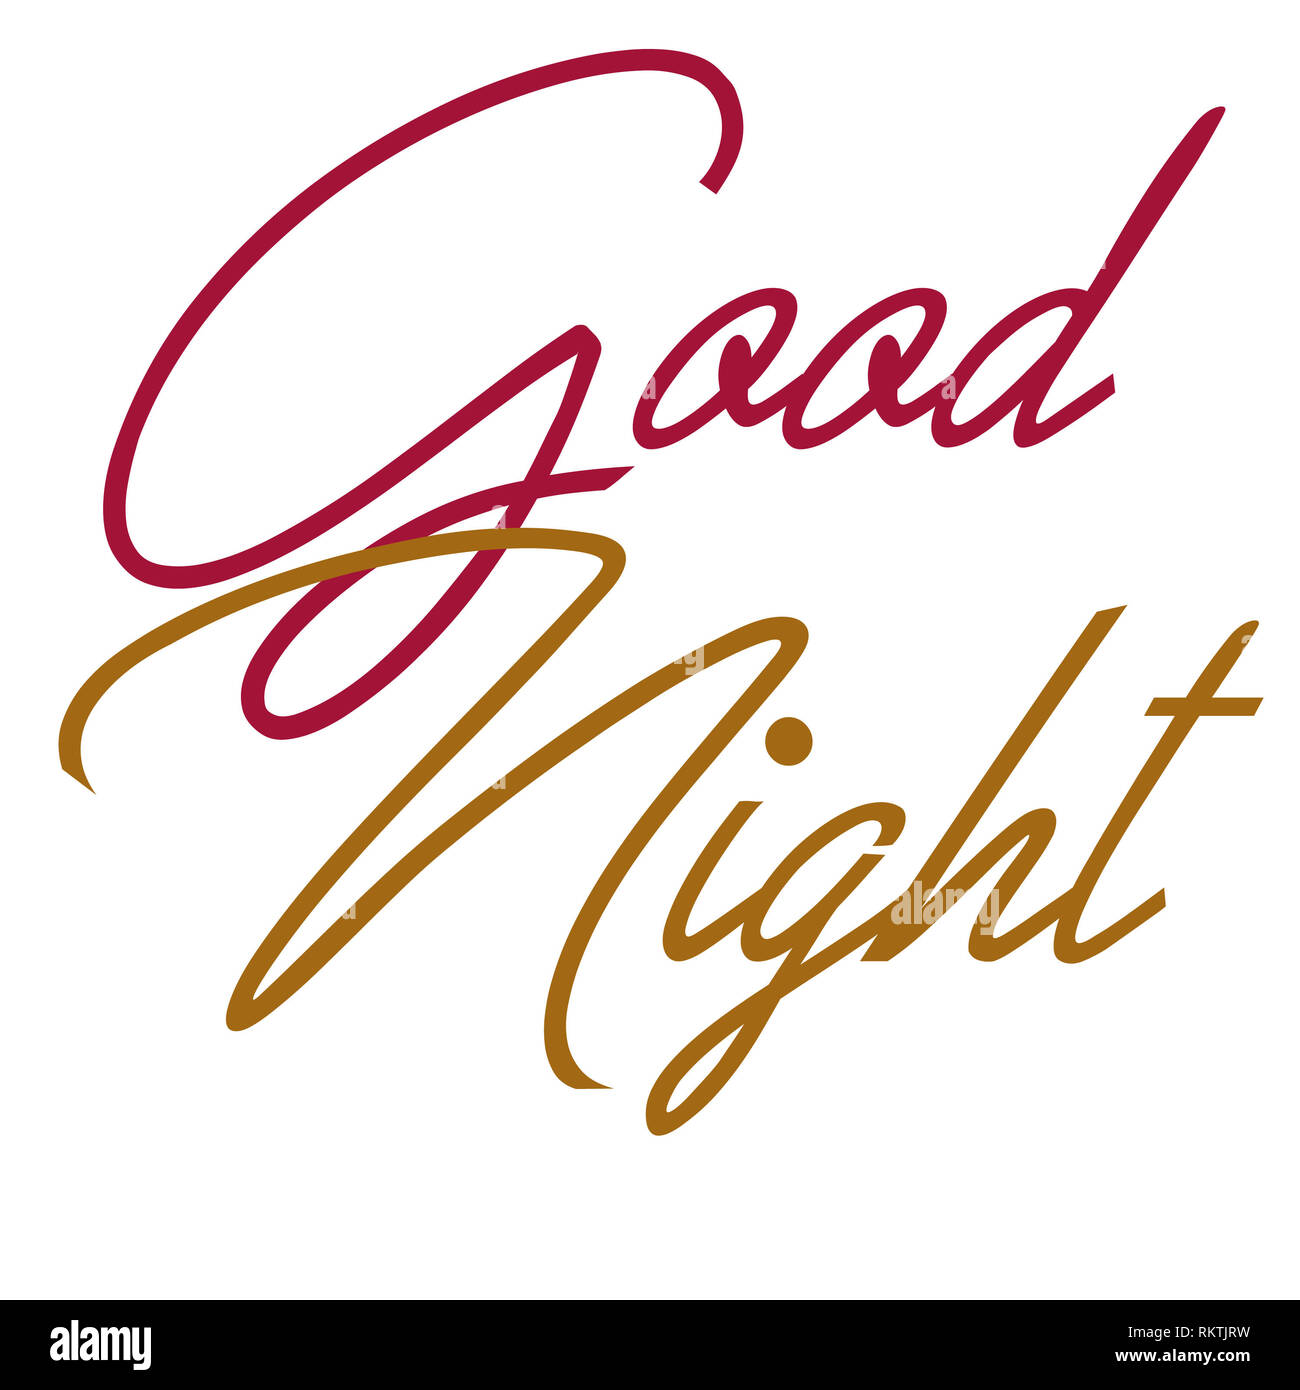 Good night greetings and wishes with styles Stock Photo - Alamy